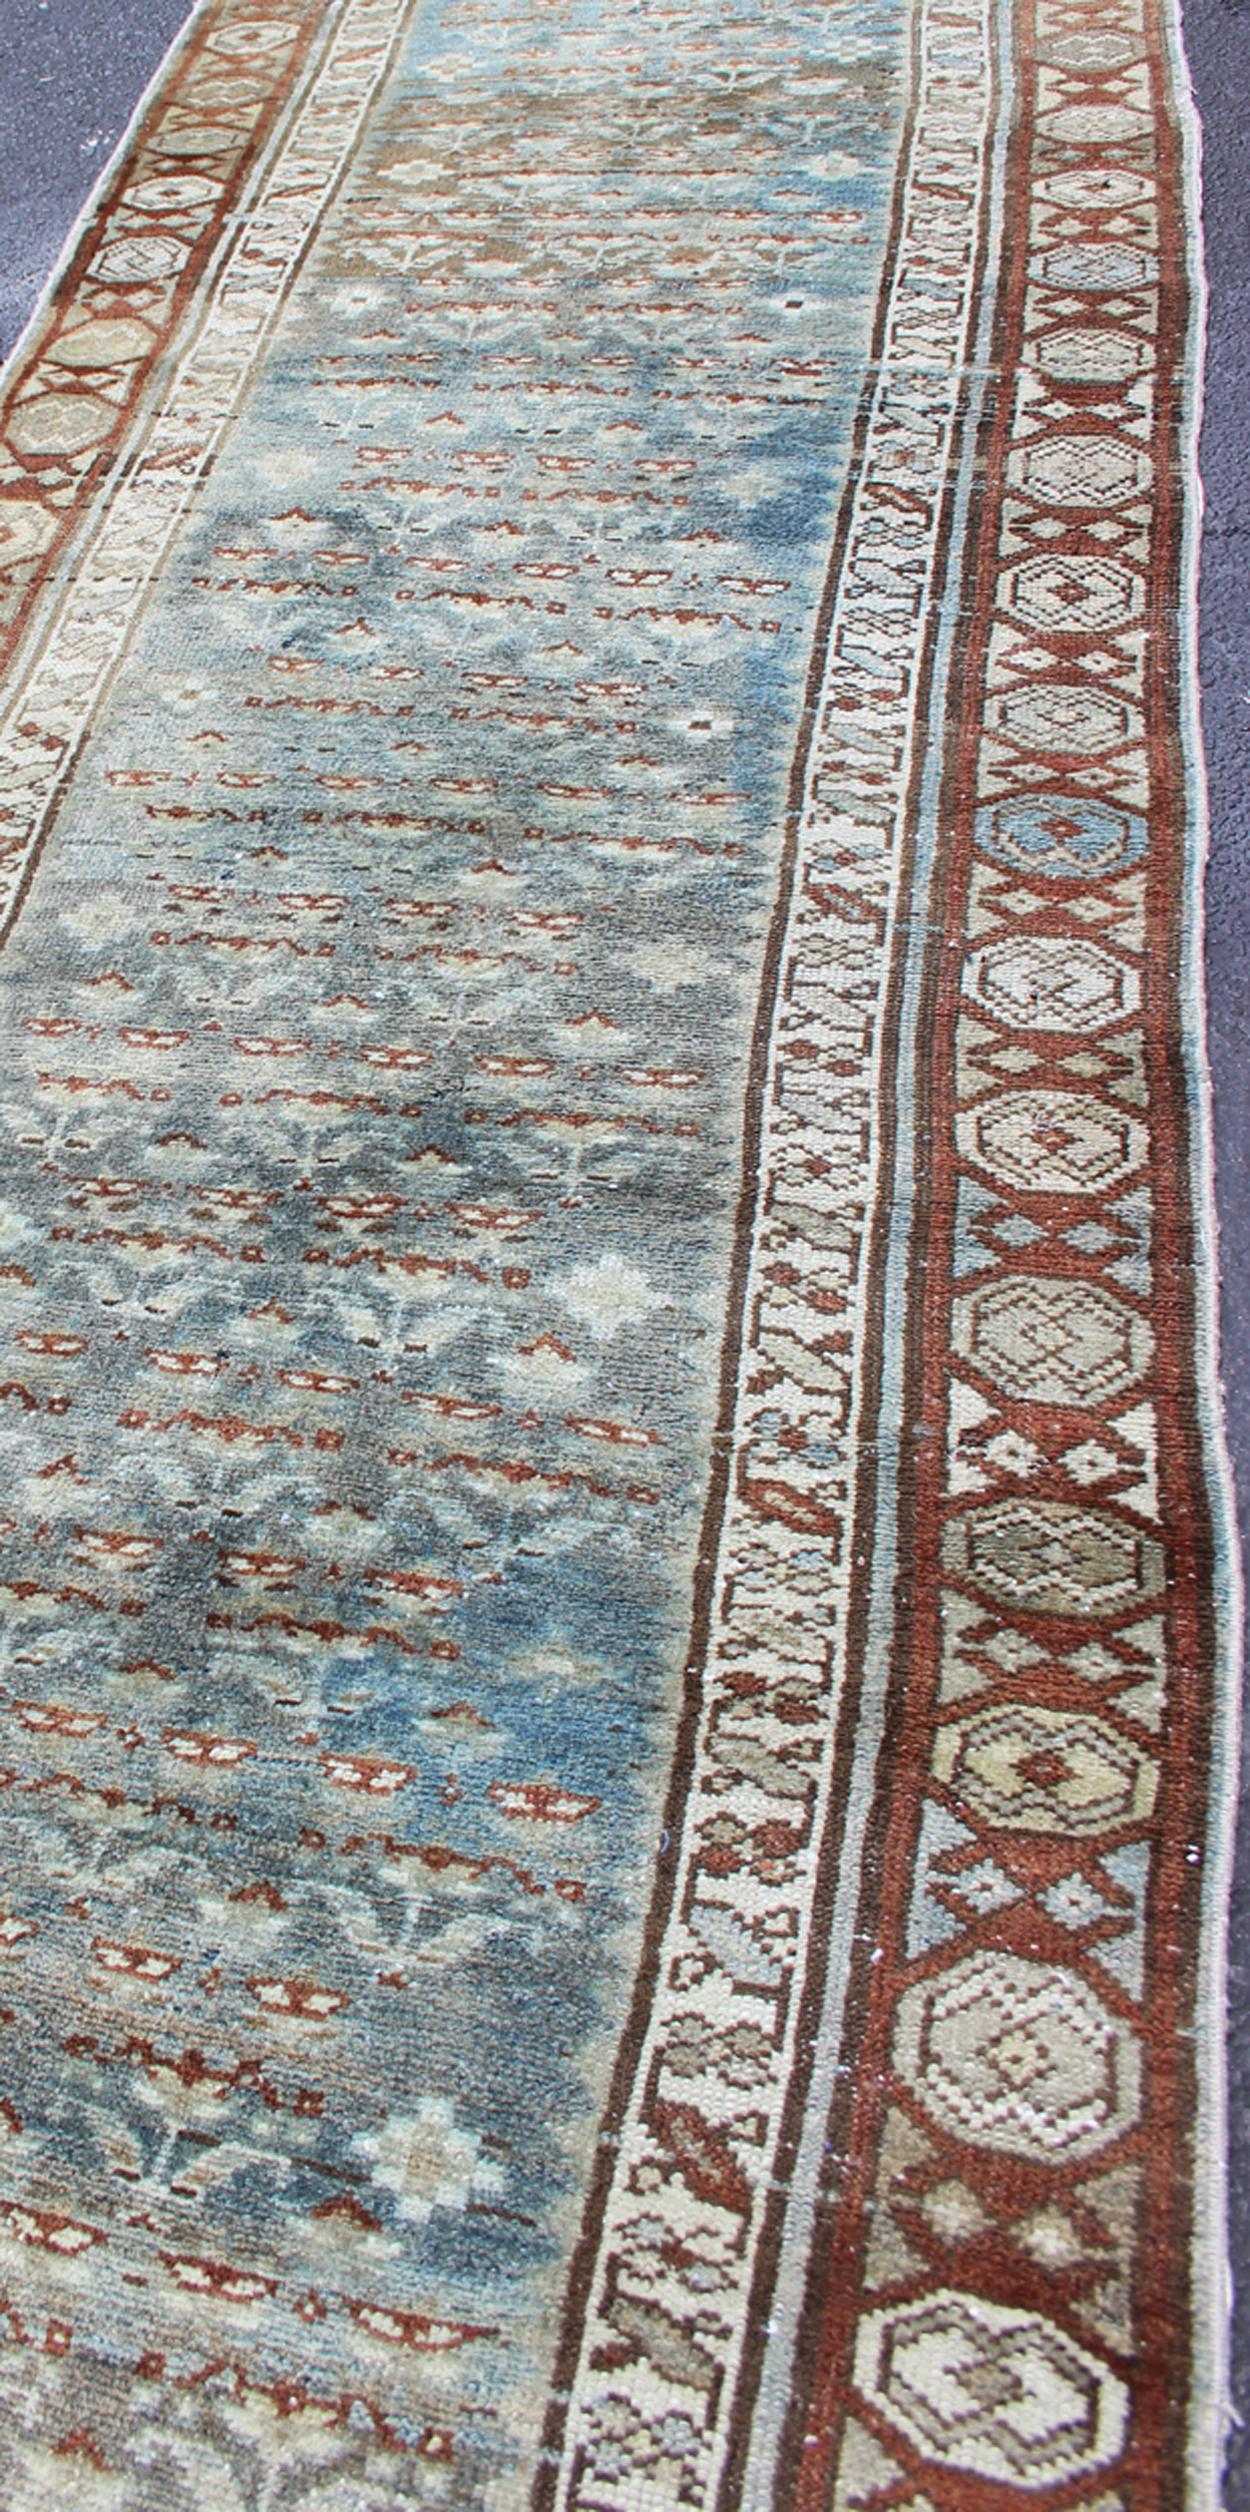 Antique Persian Malayer Runner in Gray, Blue, and Red with All-Over Design 1